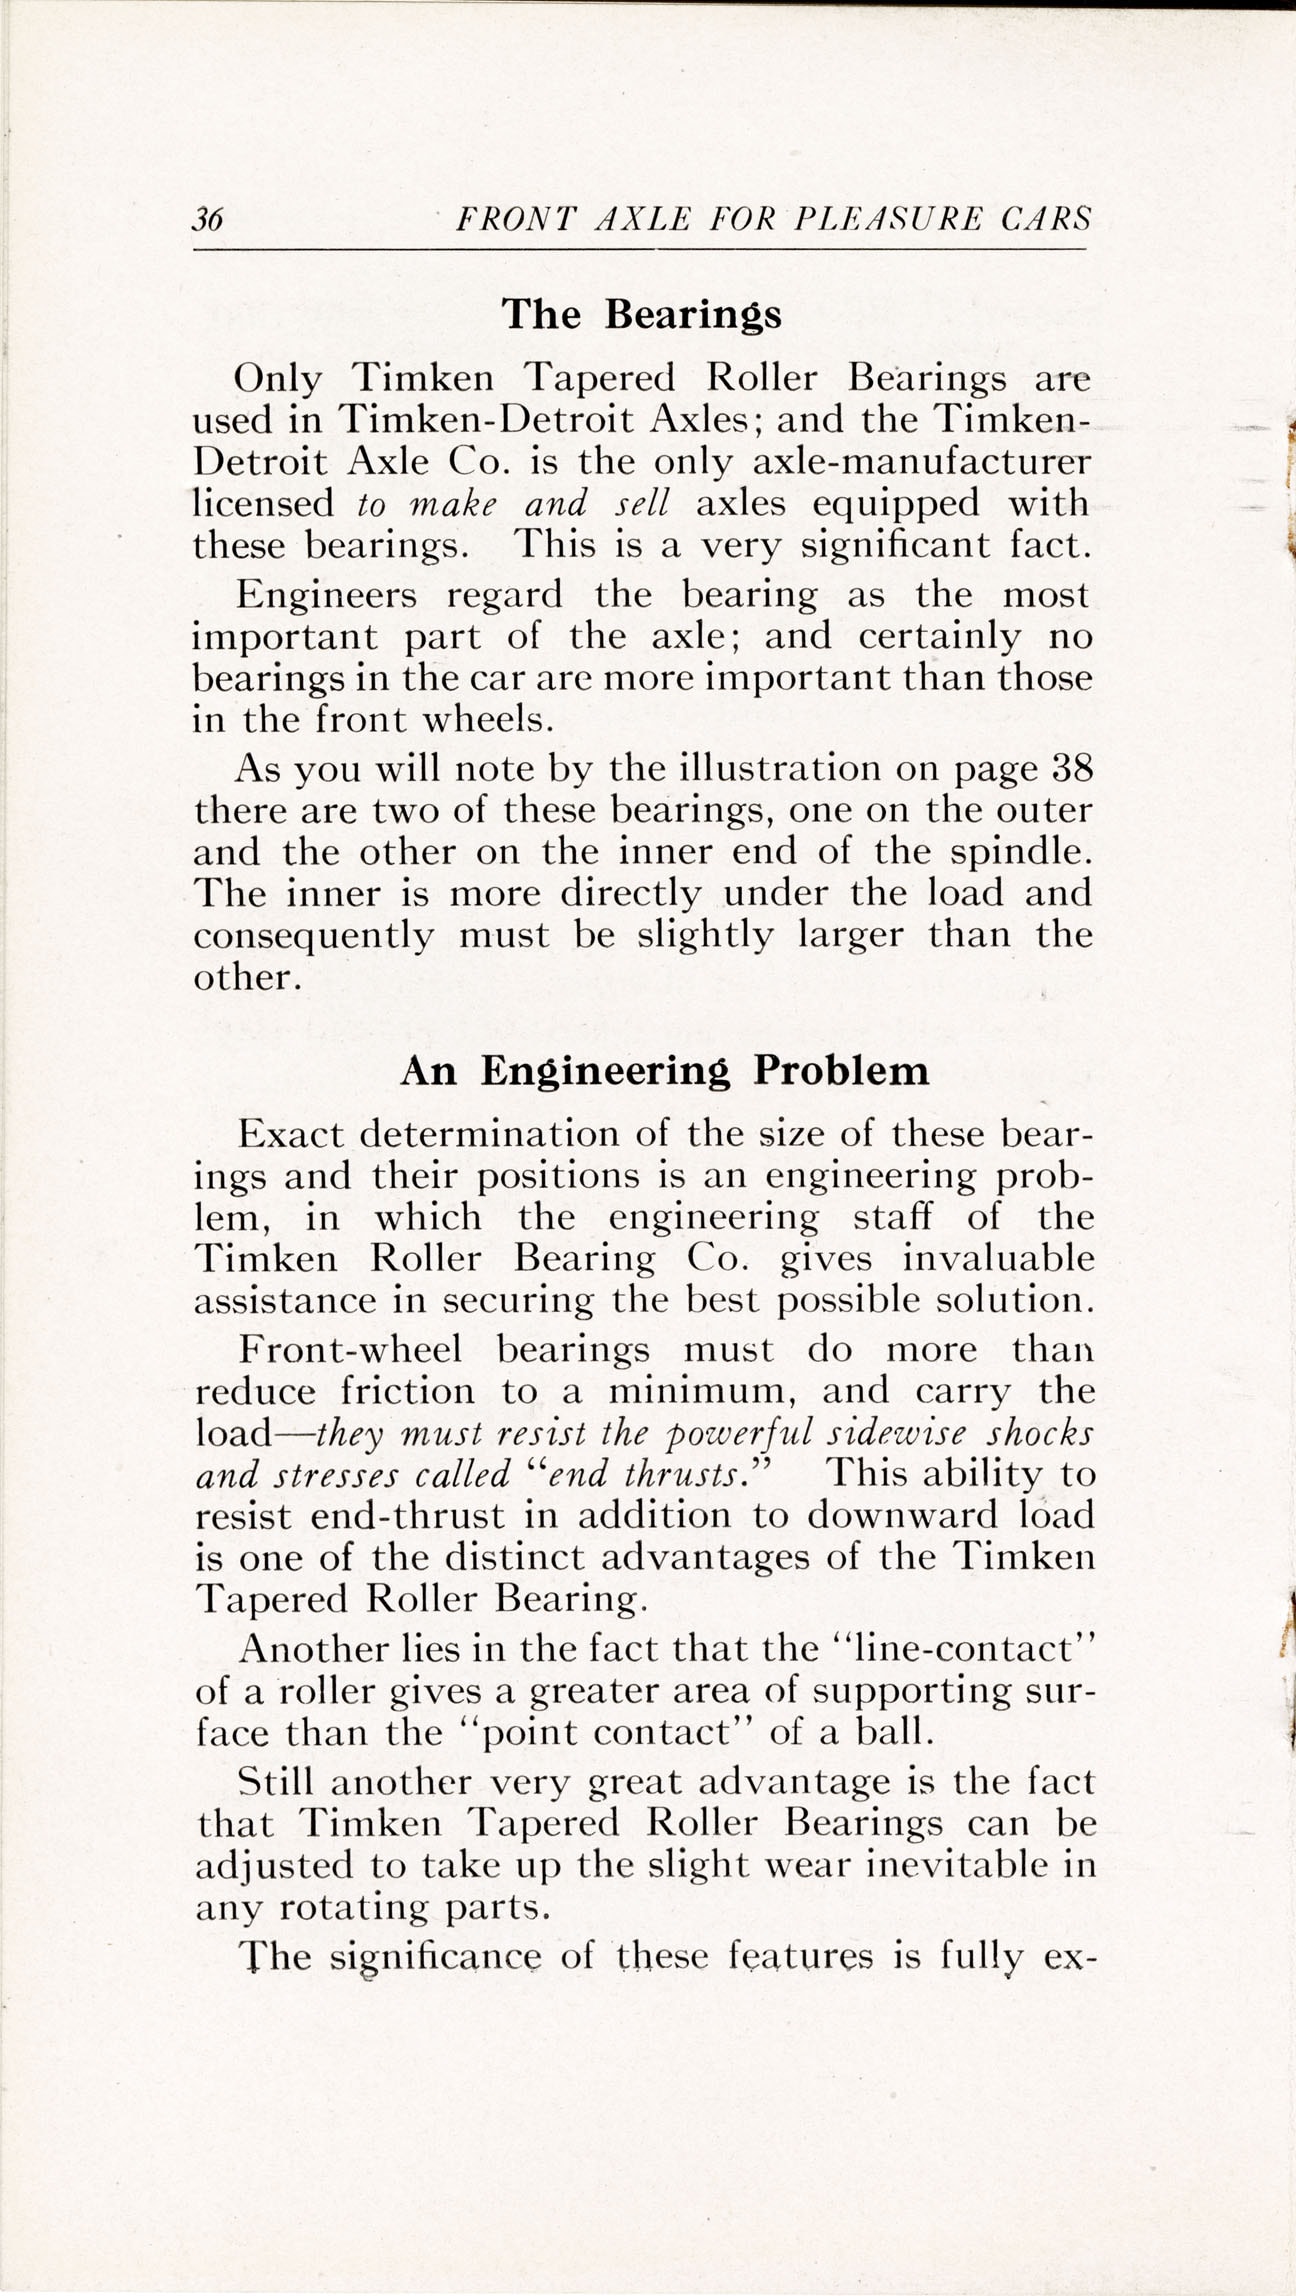 1915 TIMKEN PRIMER On the Anatomy of Automobile Axles 7th edition Burton Historical Collection Detroit Public Library page 36